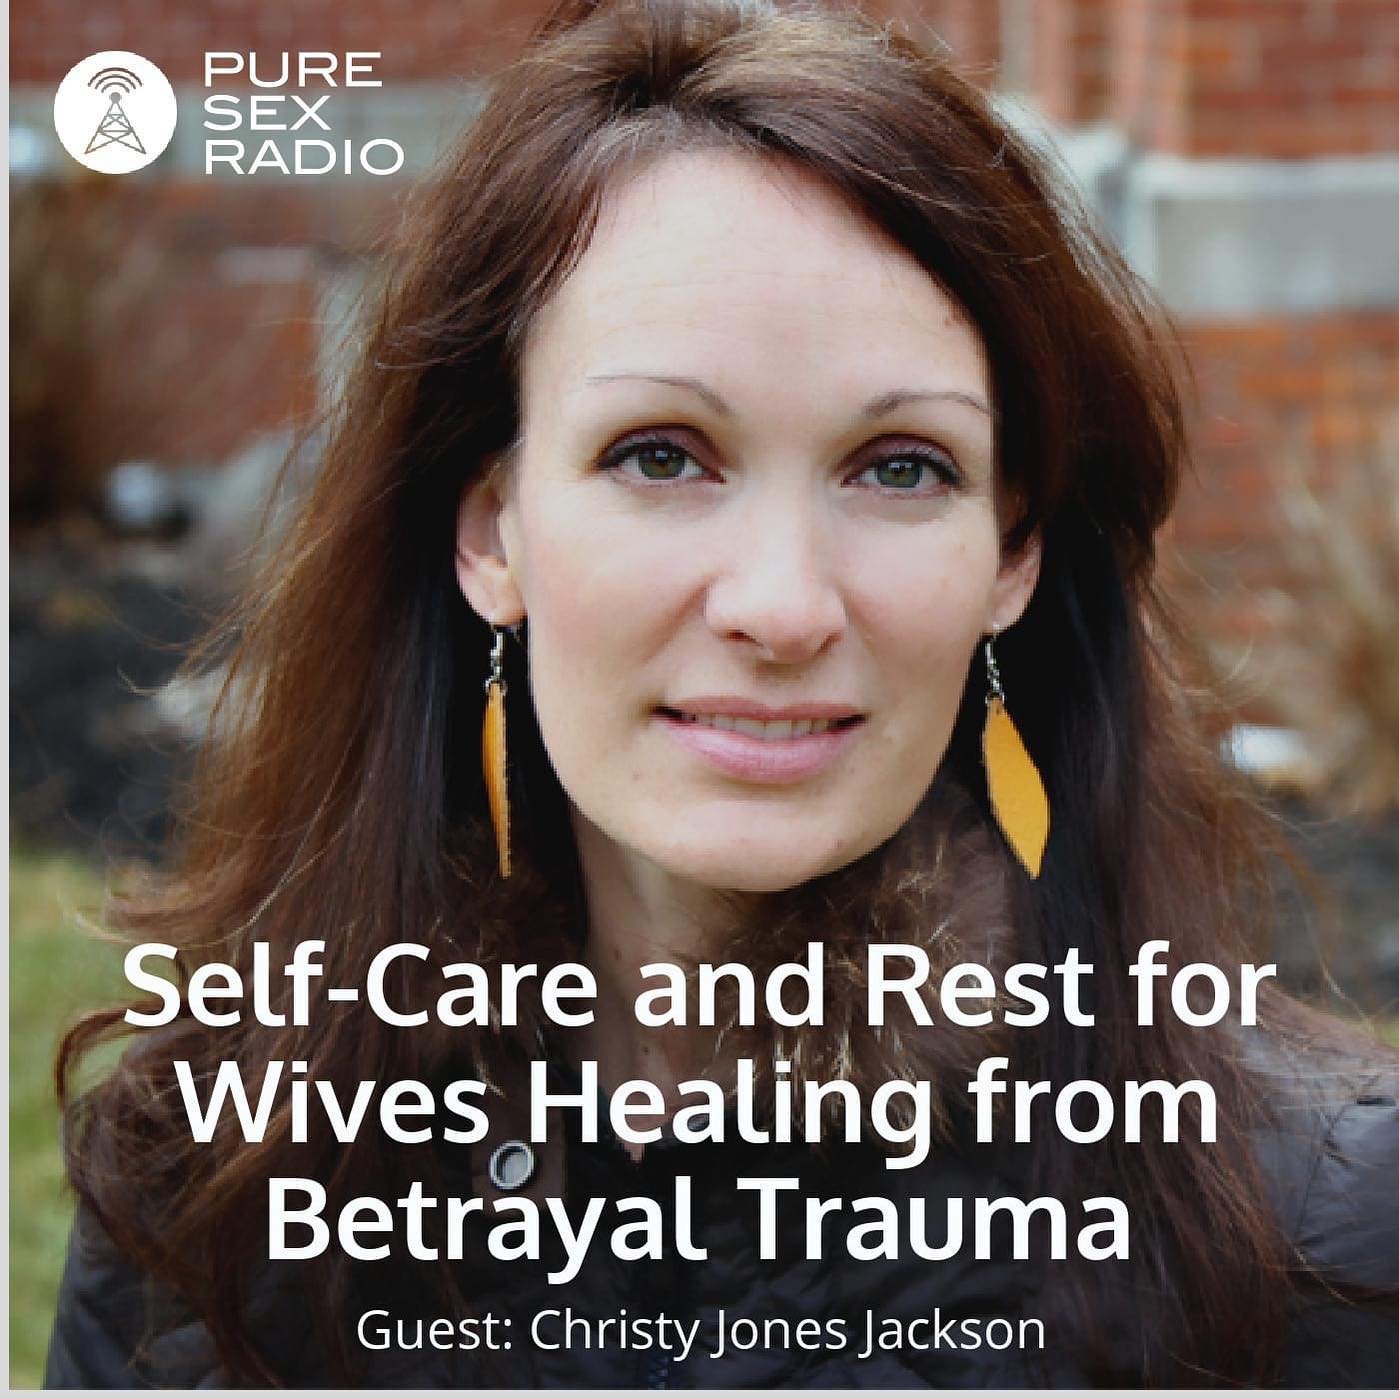 For over 10 years Be Broken has helped wives heal from sexual betrayal trauma. One aspect of this healing process that simply should not be overlooked is the need for self-care and simply rest. 

Executive Director and founder, @christyjonesjackson ,